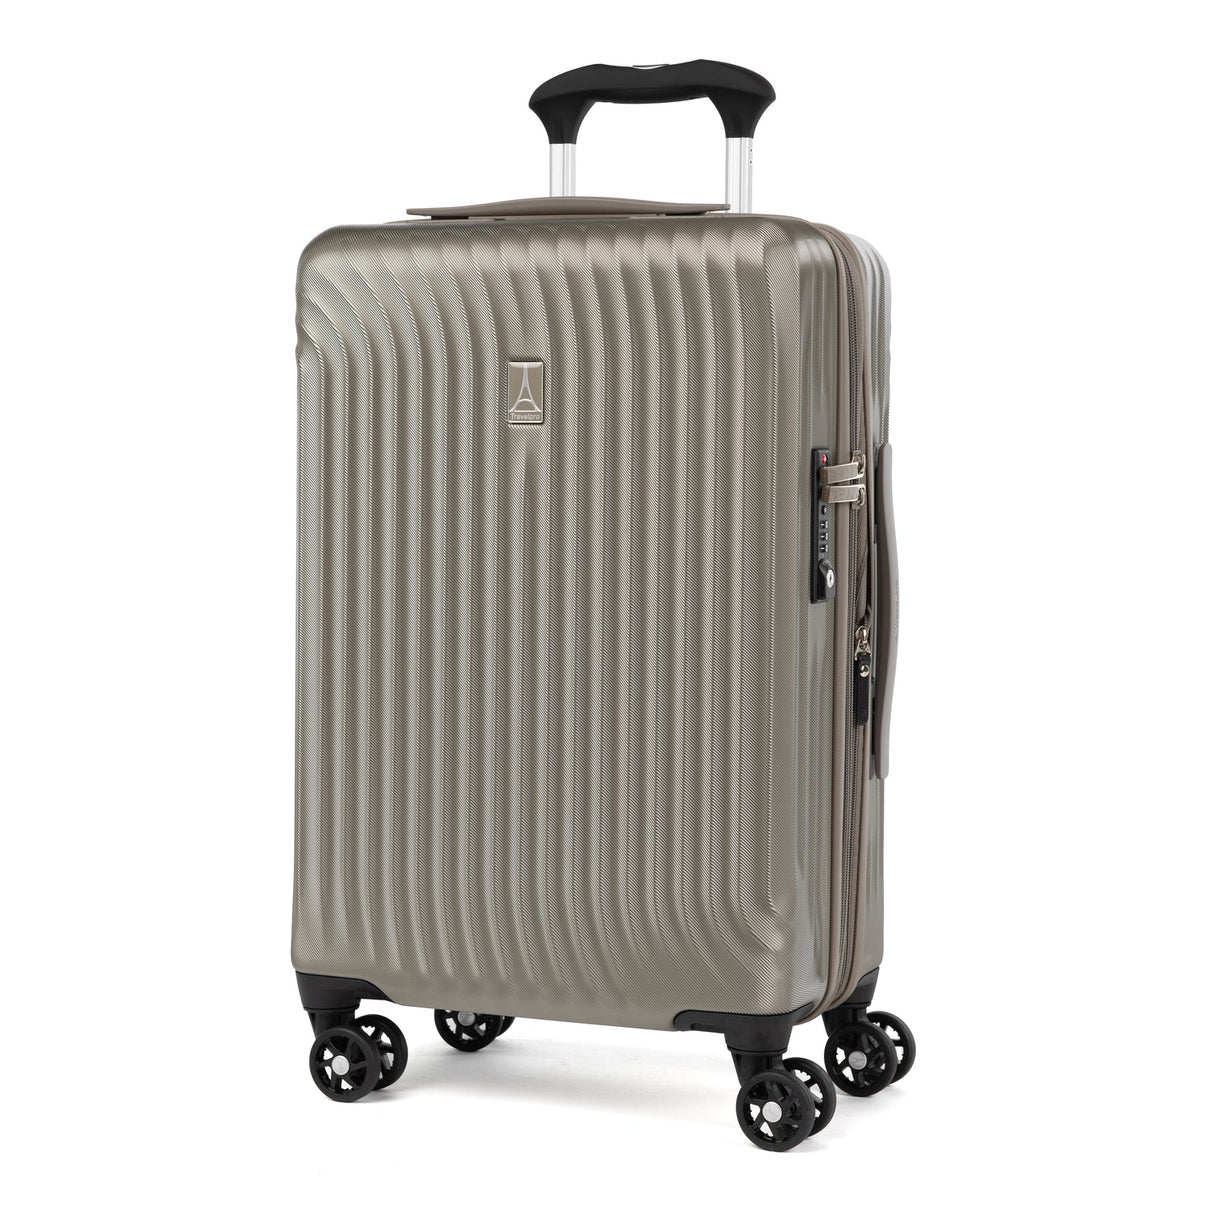 Travelpro Maxlite Air Carry-On Expandable Hardside Spinner , , 401229135_front-1500x1500-d707c29_1024x1024_2x_1cfc9c97-b862-4adc-ad08-713808eb8614